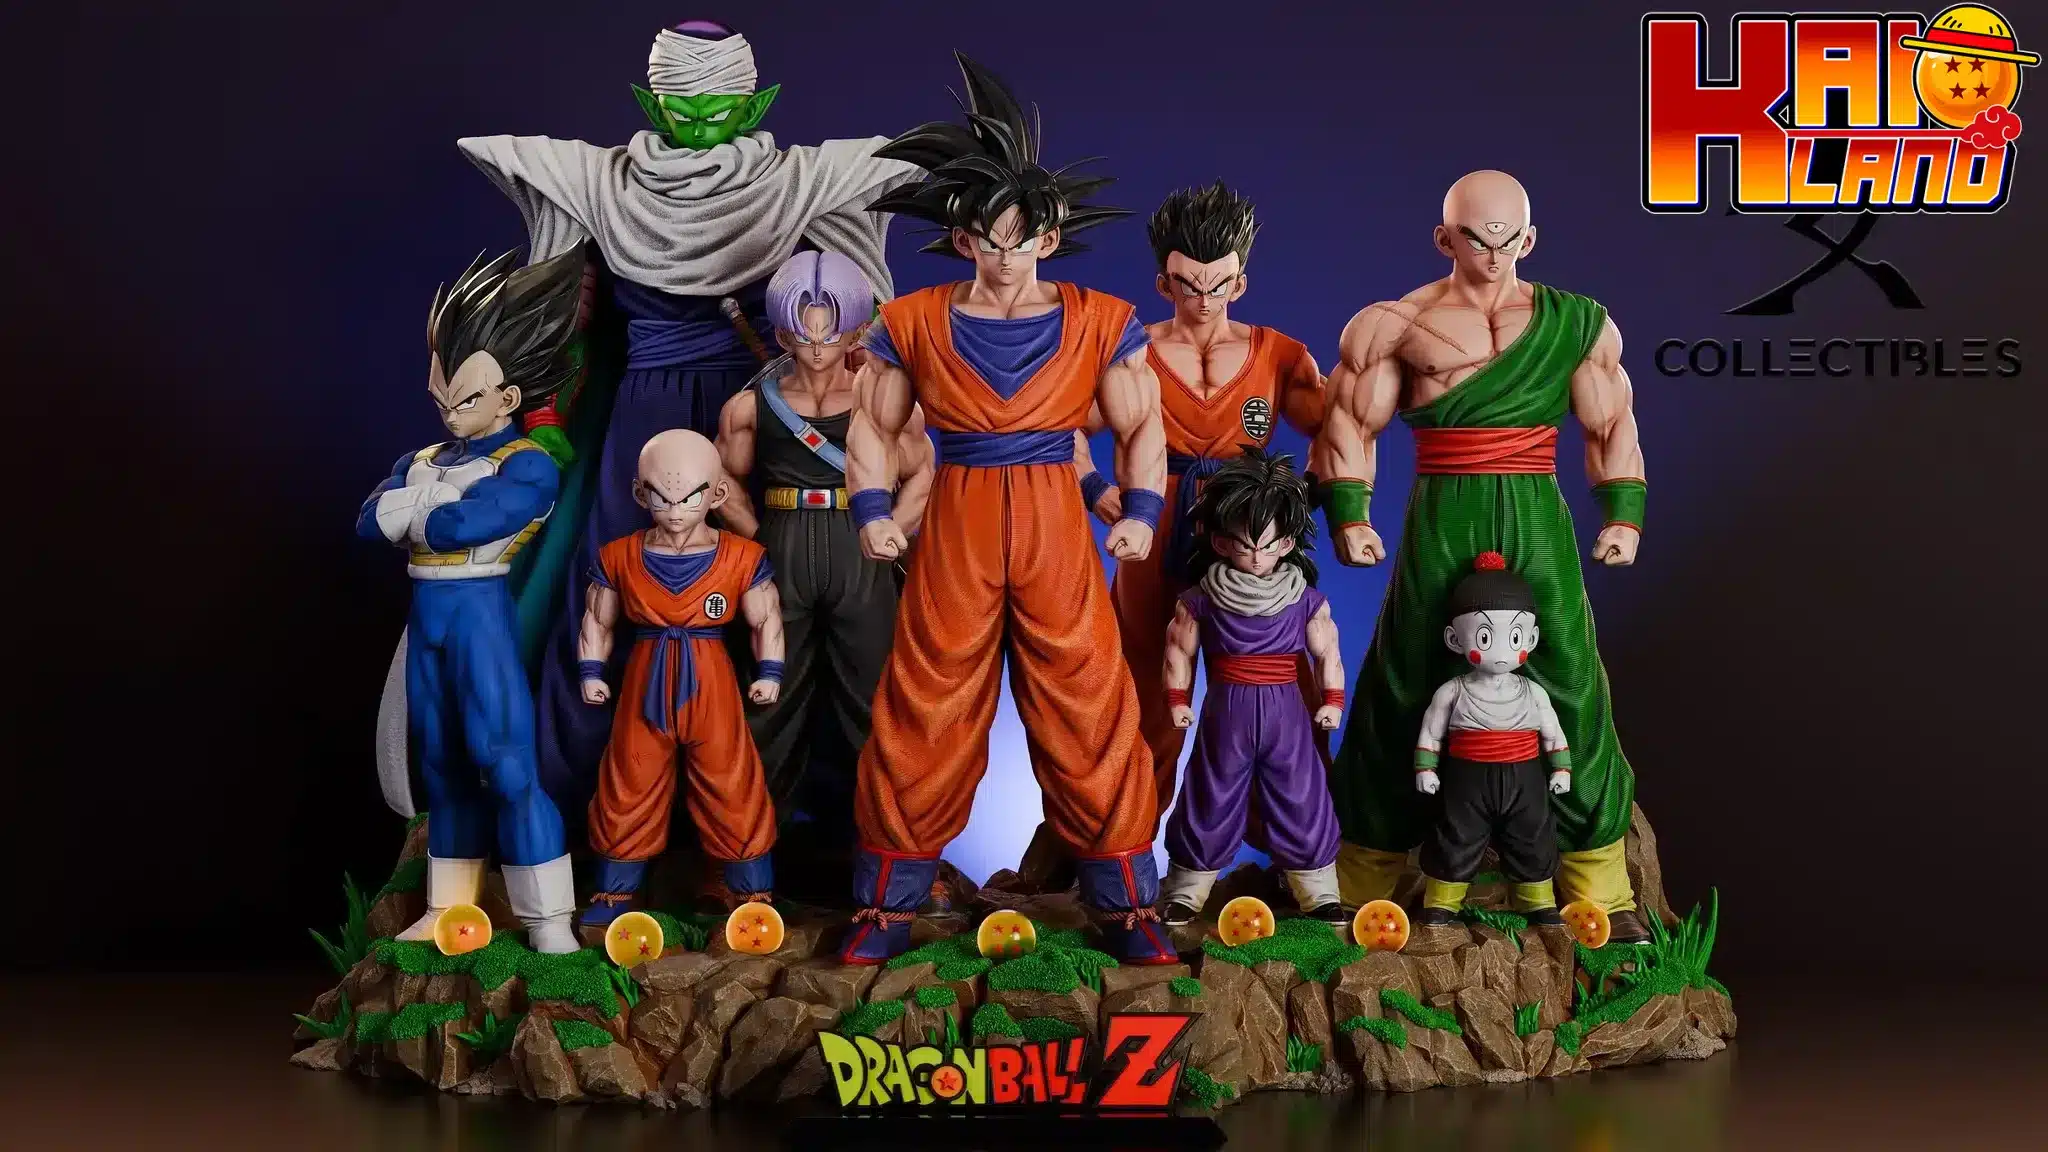 Dragon-Ball-KD-Collectibles-Z-Fighters-Resin-Statue-1-jpg.png